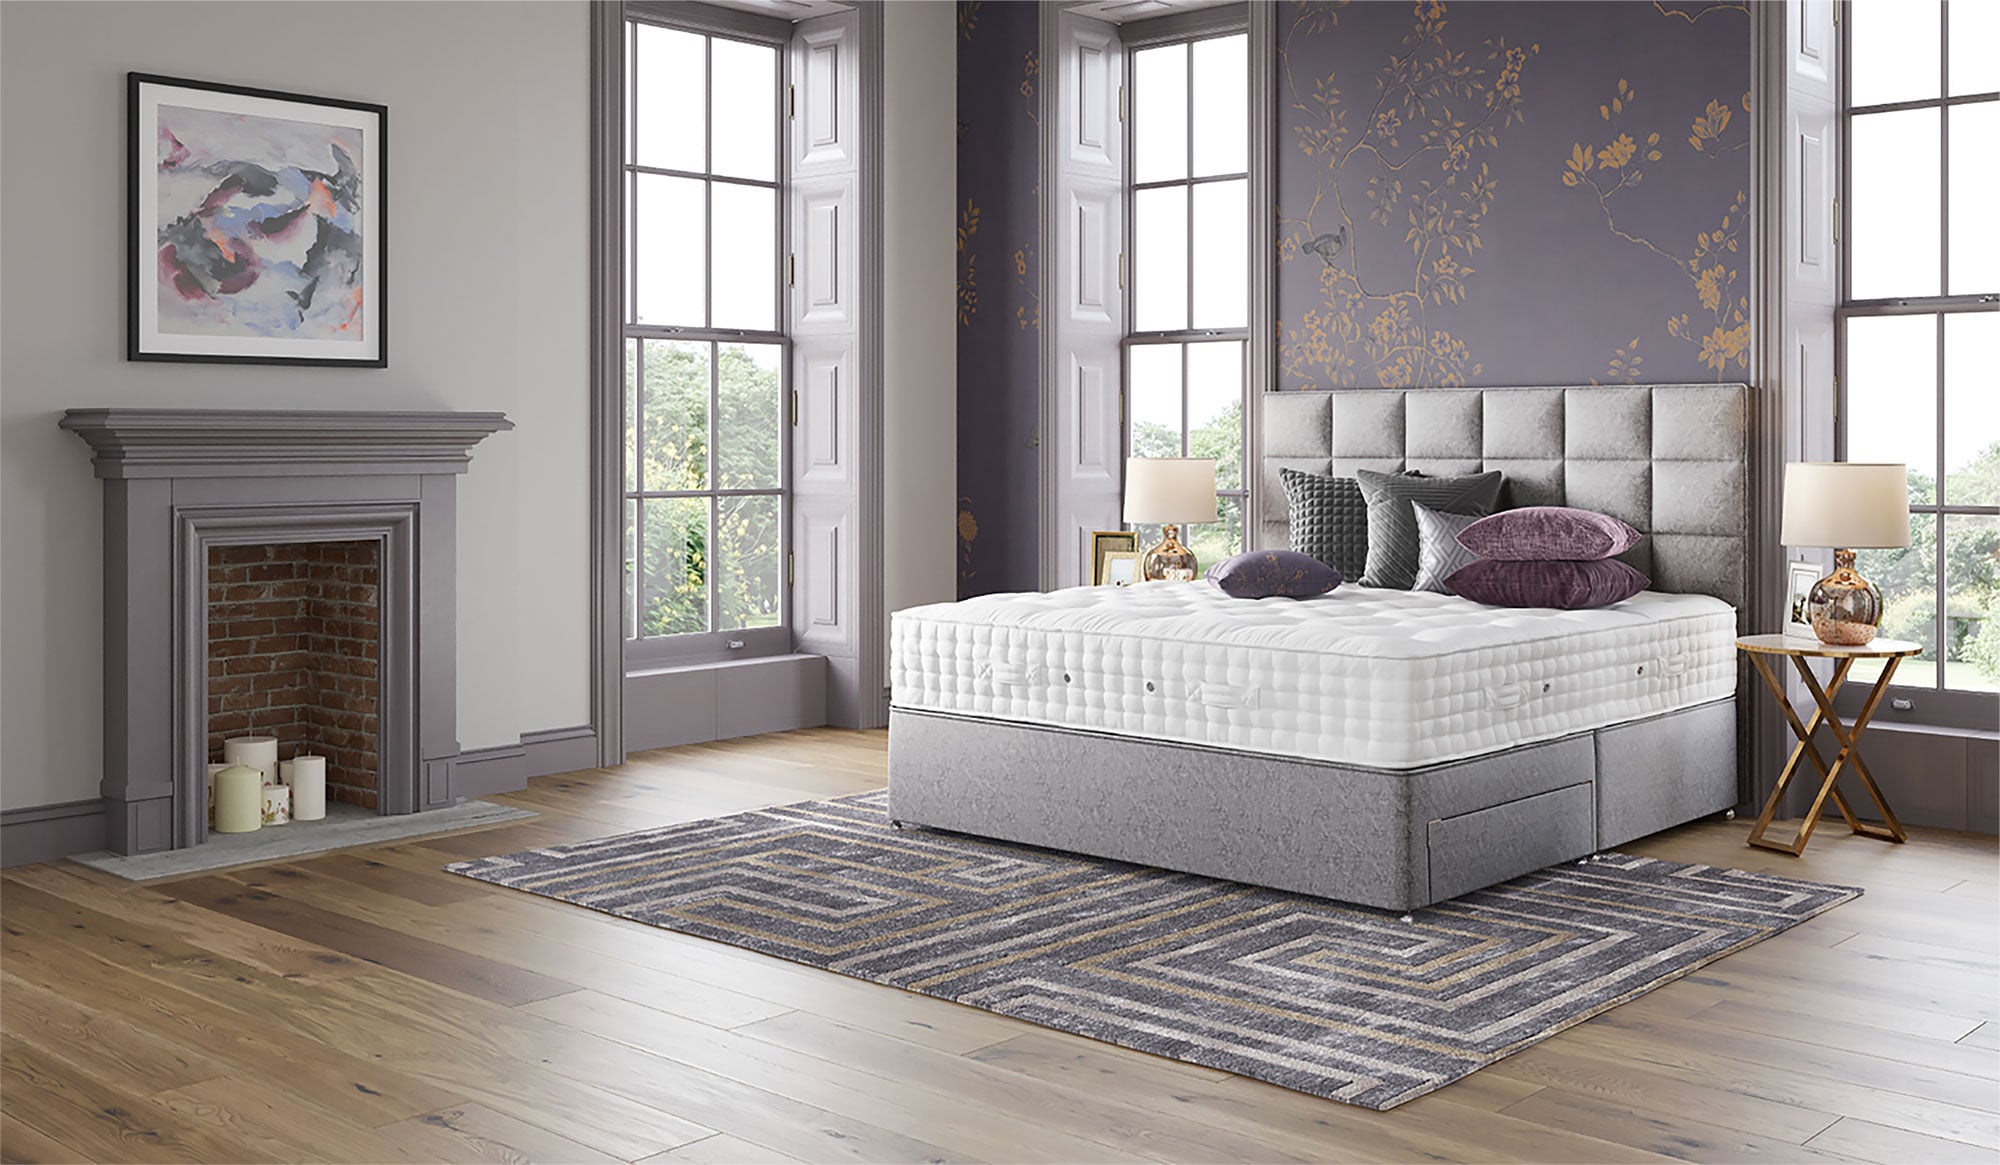 beds and mattresses online